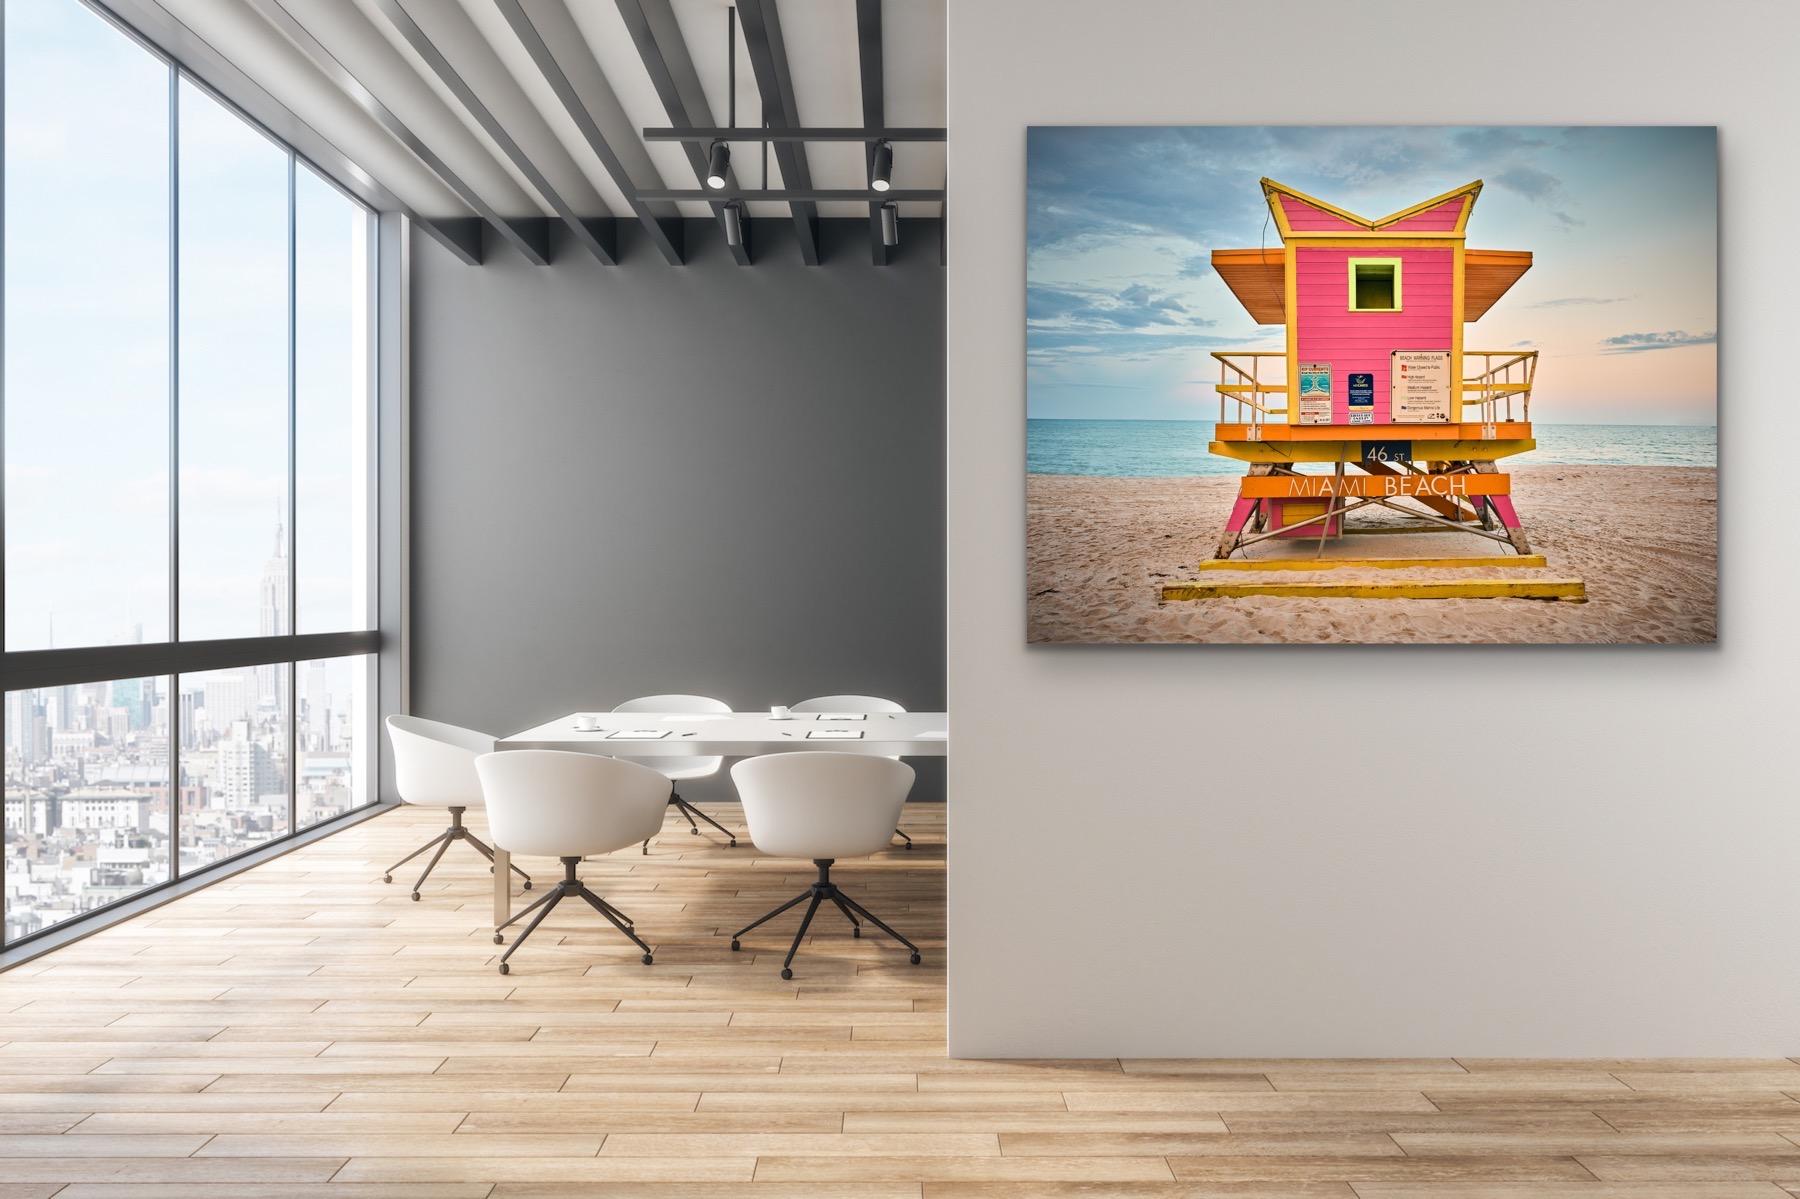 This contemporary coastal photograph by Peter Mendelson features a warm, subtle palette. It captures one of the famously unique lifeguard stands of Miami Beach, Florida, with magenta panelling and yellow and orange trim. The lifeguard stand